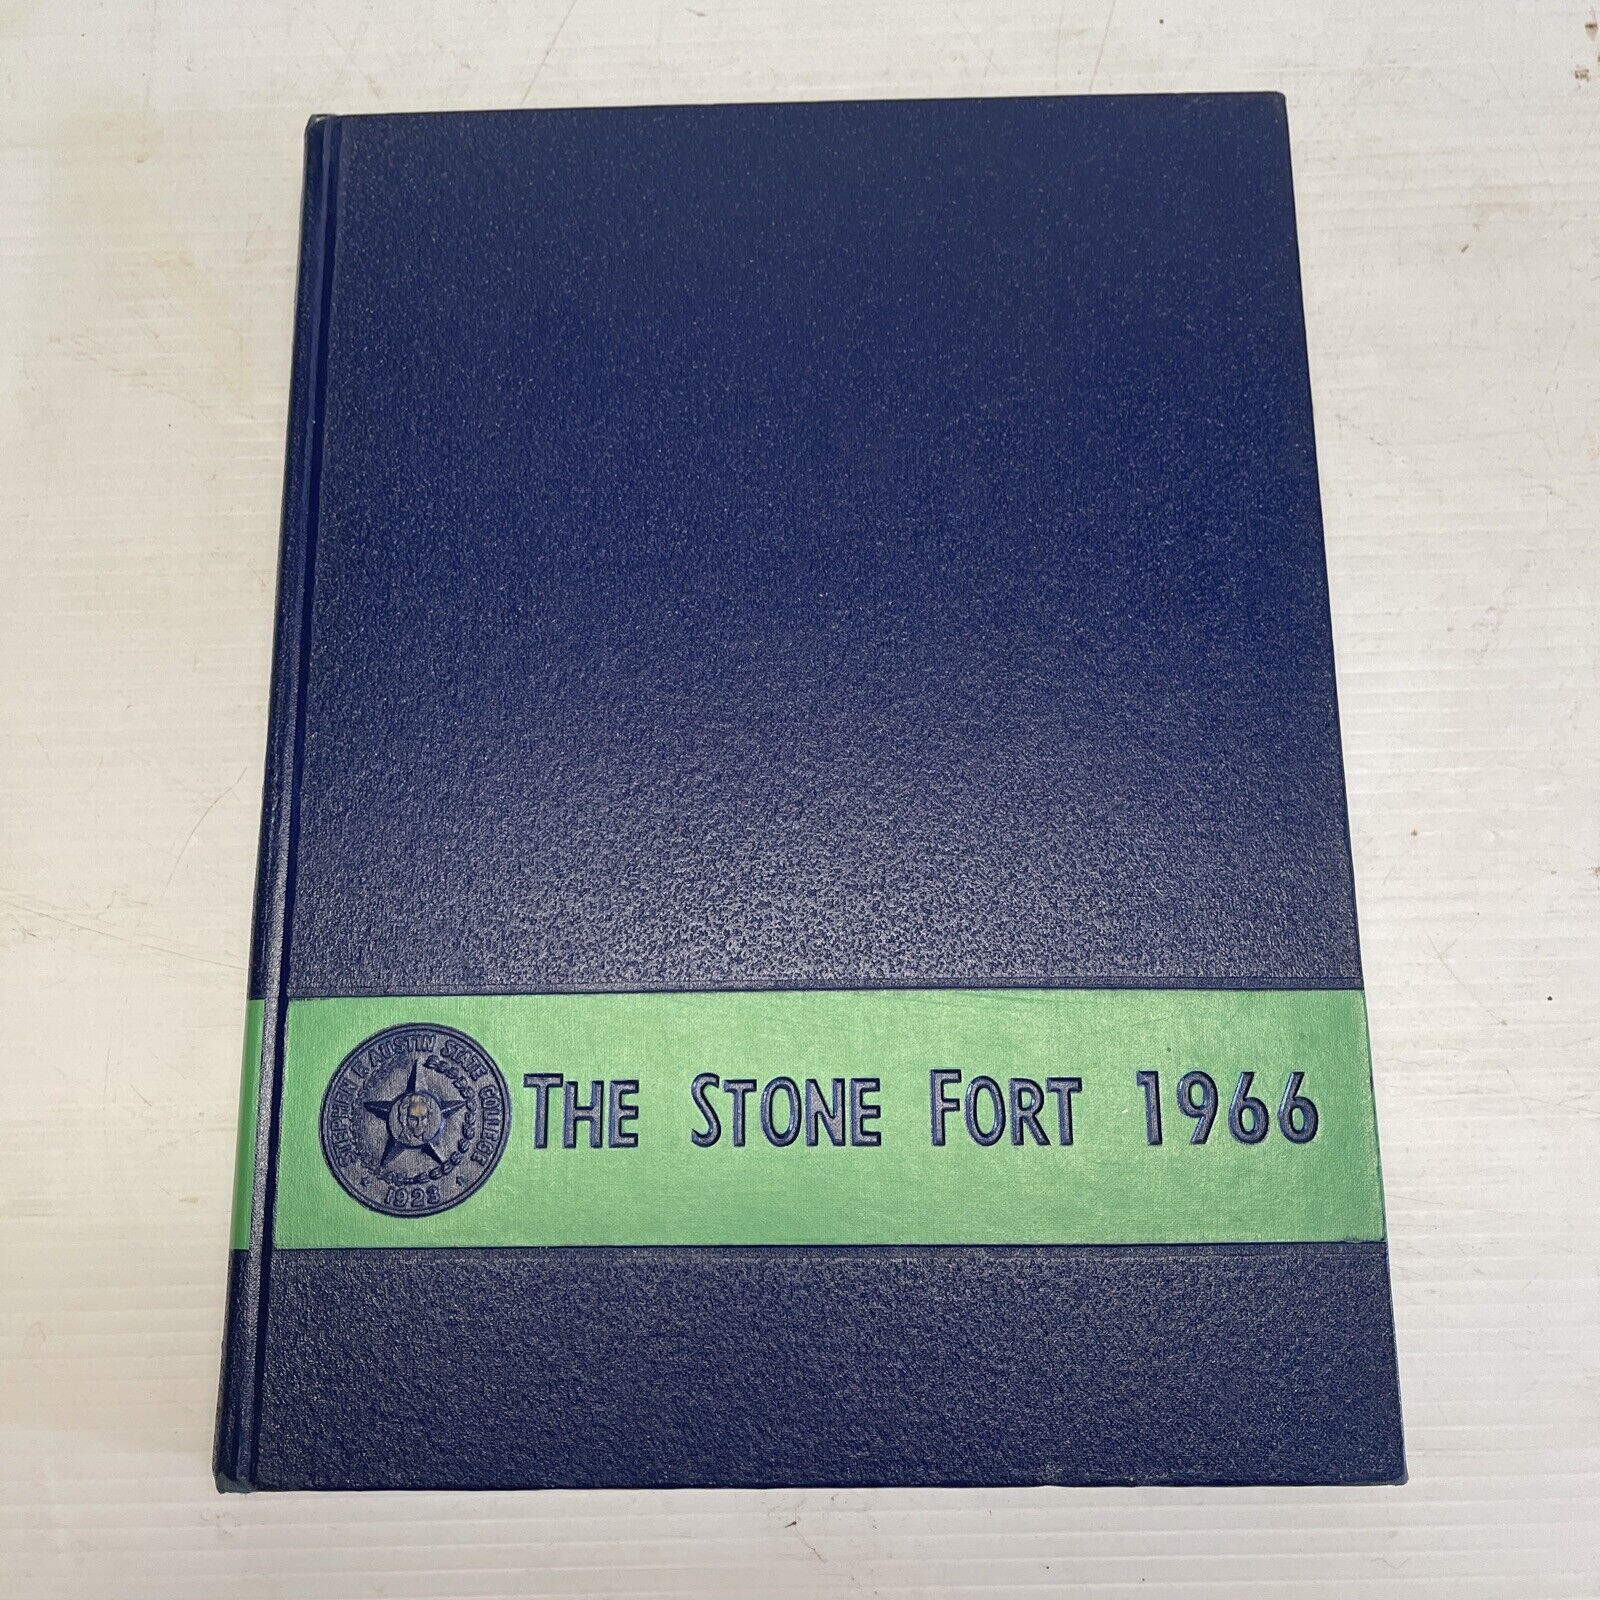 The Stone Fort 1966 SFA YEARBOOK  stephen f. austin university yearbook